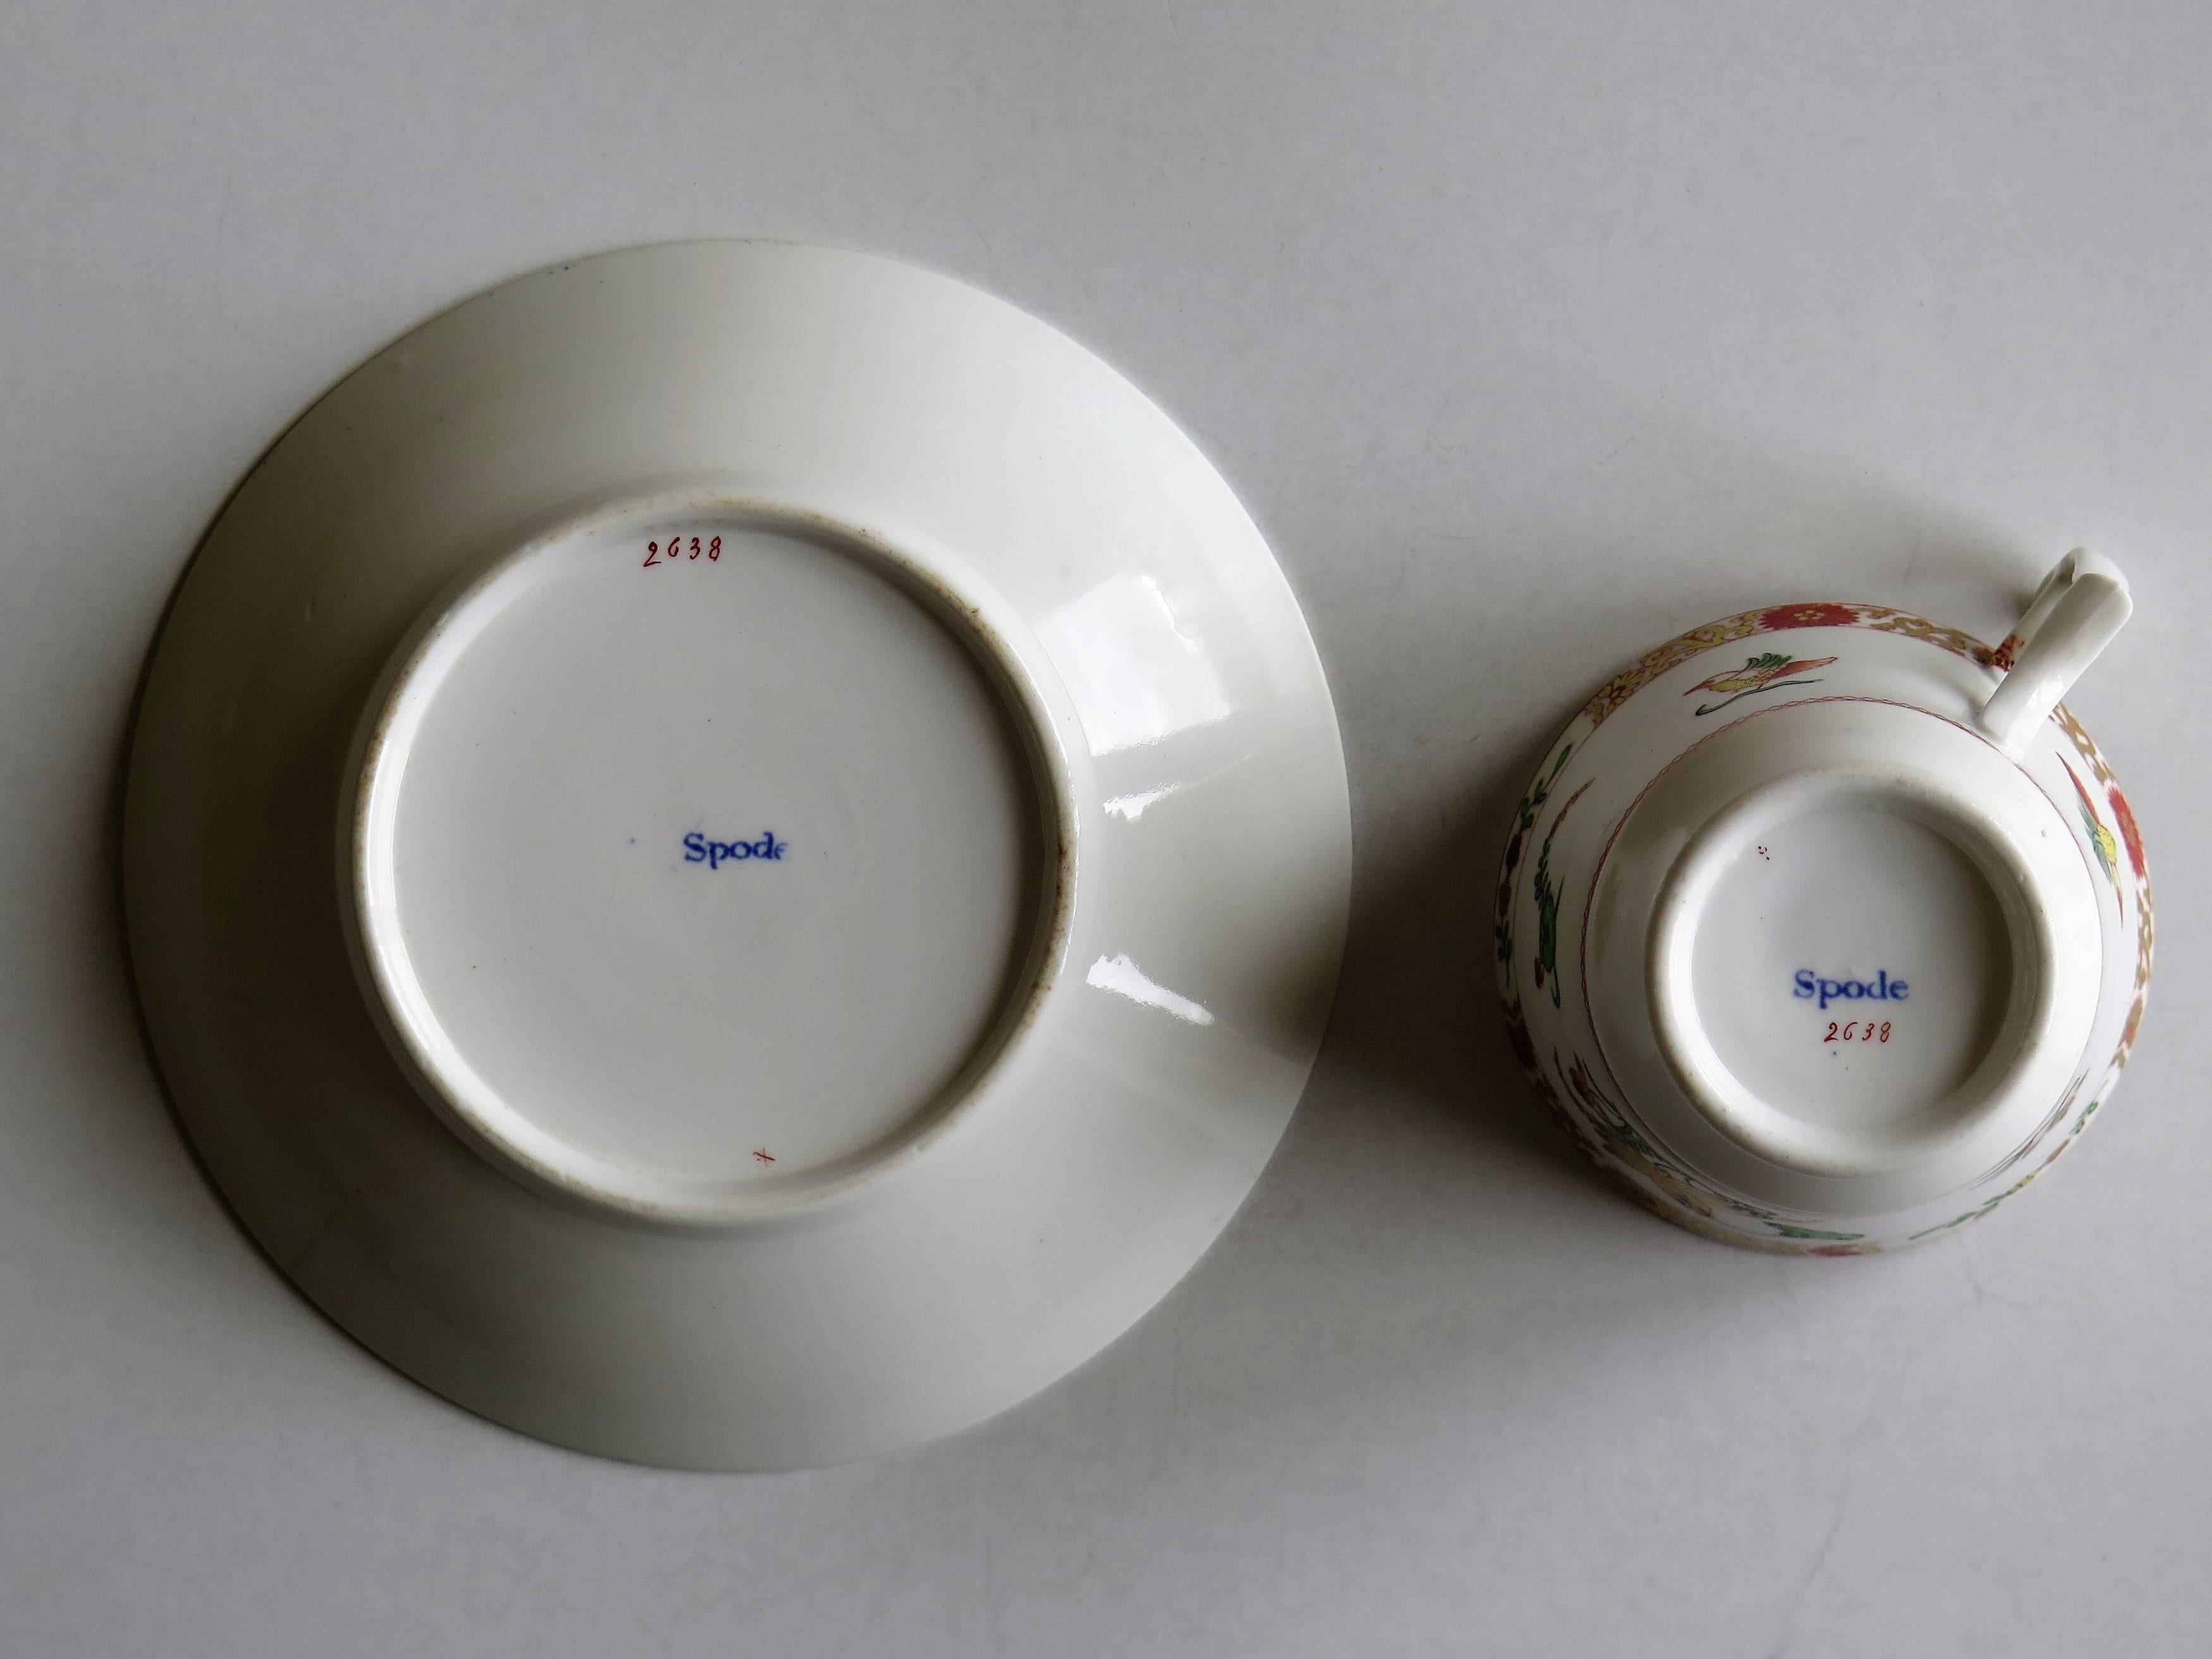 Early 19th C Spode Cup and Saucer Porcelain Chinoiserie Pattern 2638, Circa 1815 12